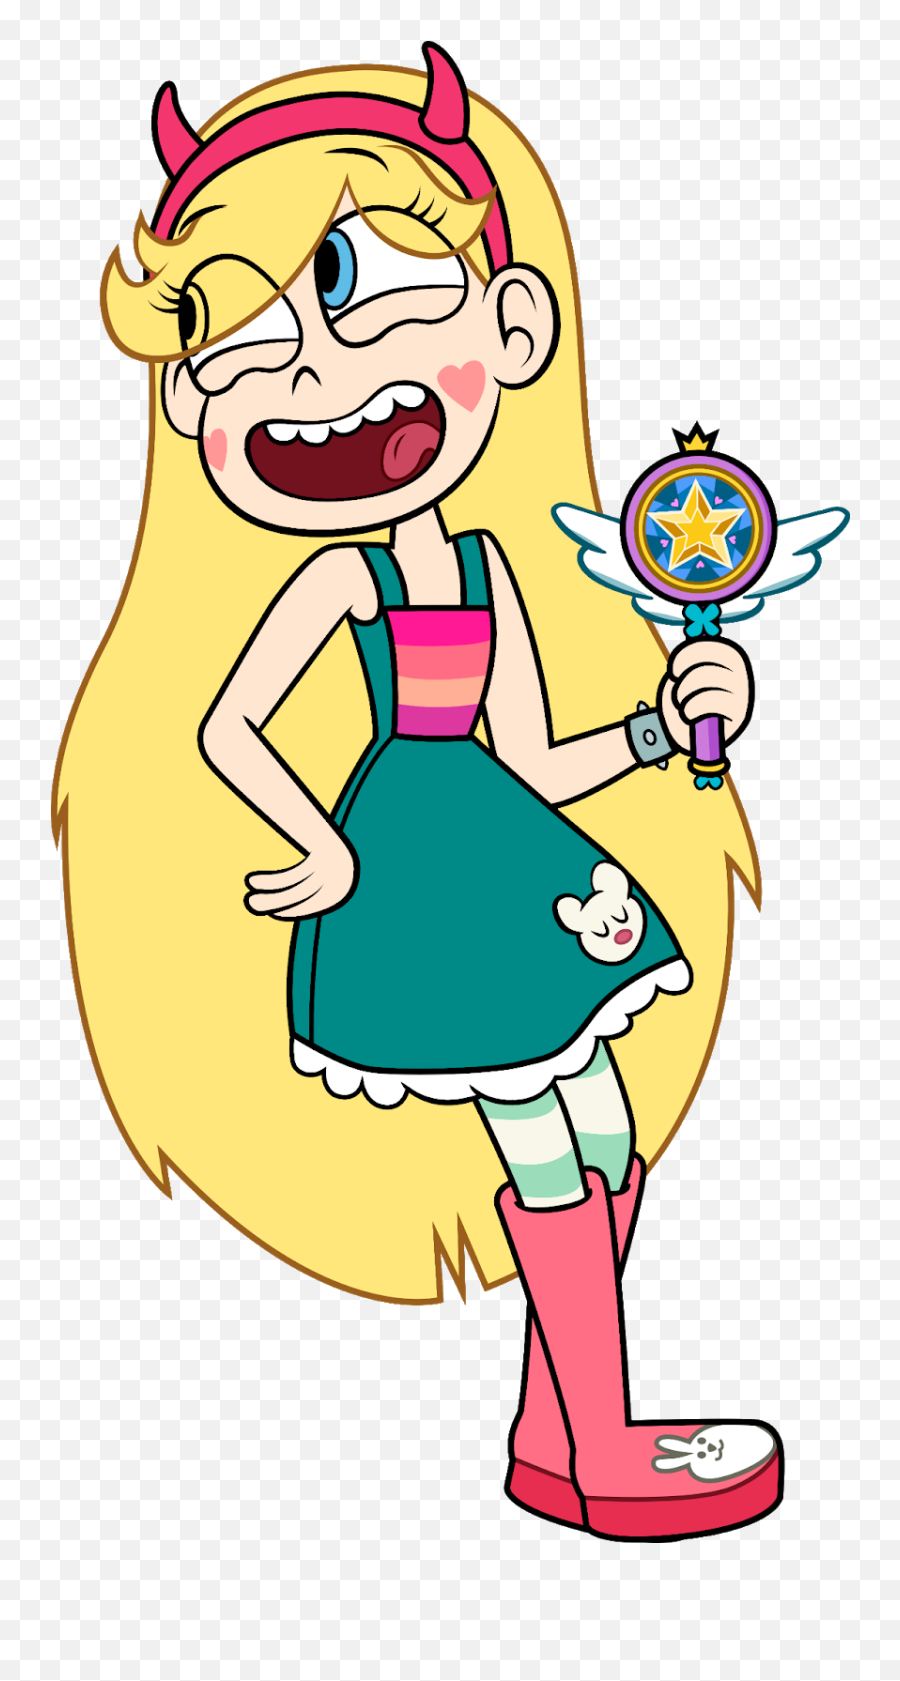 May 2021 - Pop Star Butterfly Emoji,Indside Out Emotions Gem Fusion